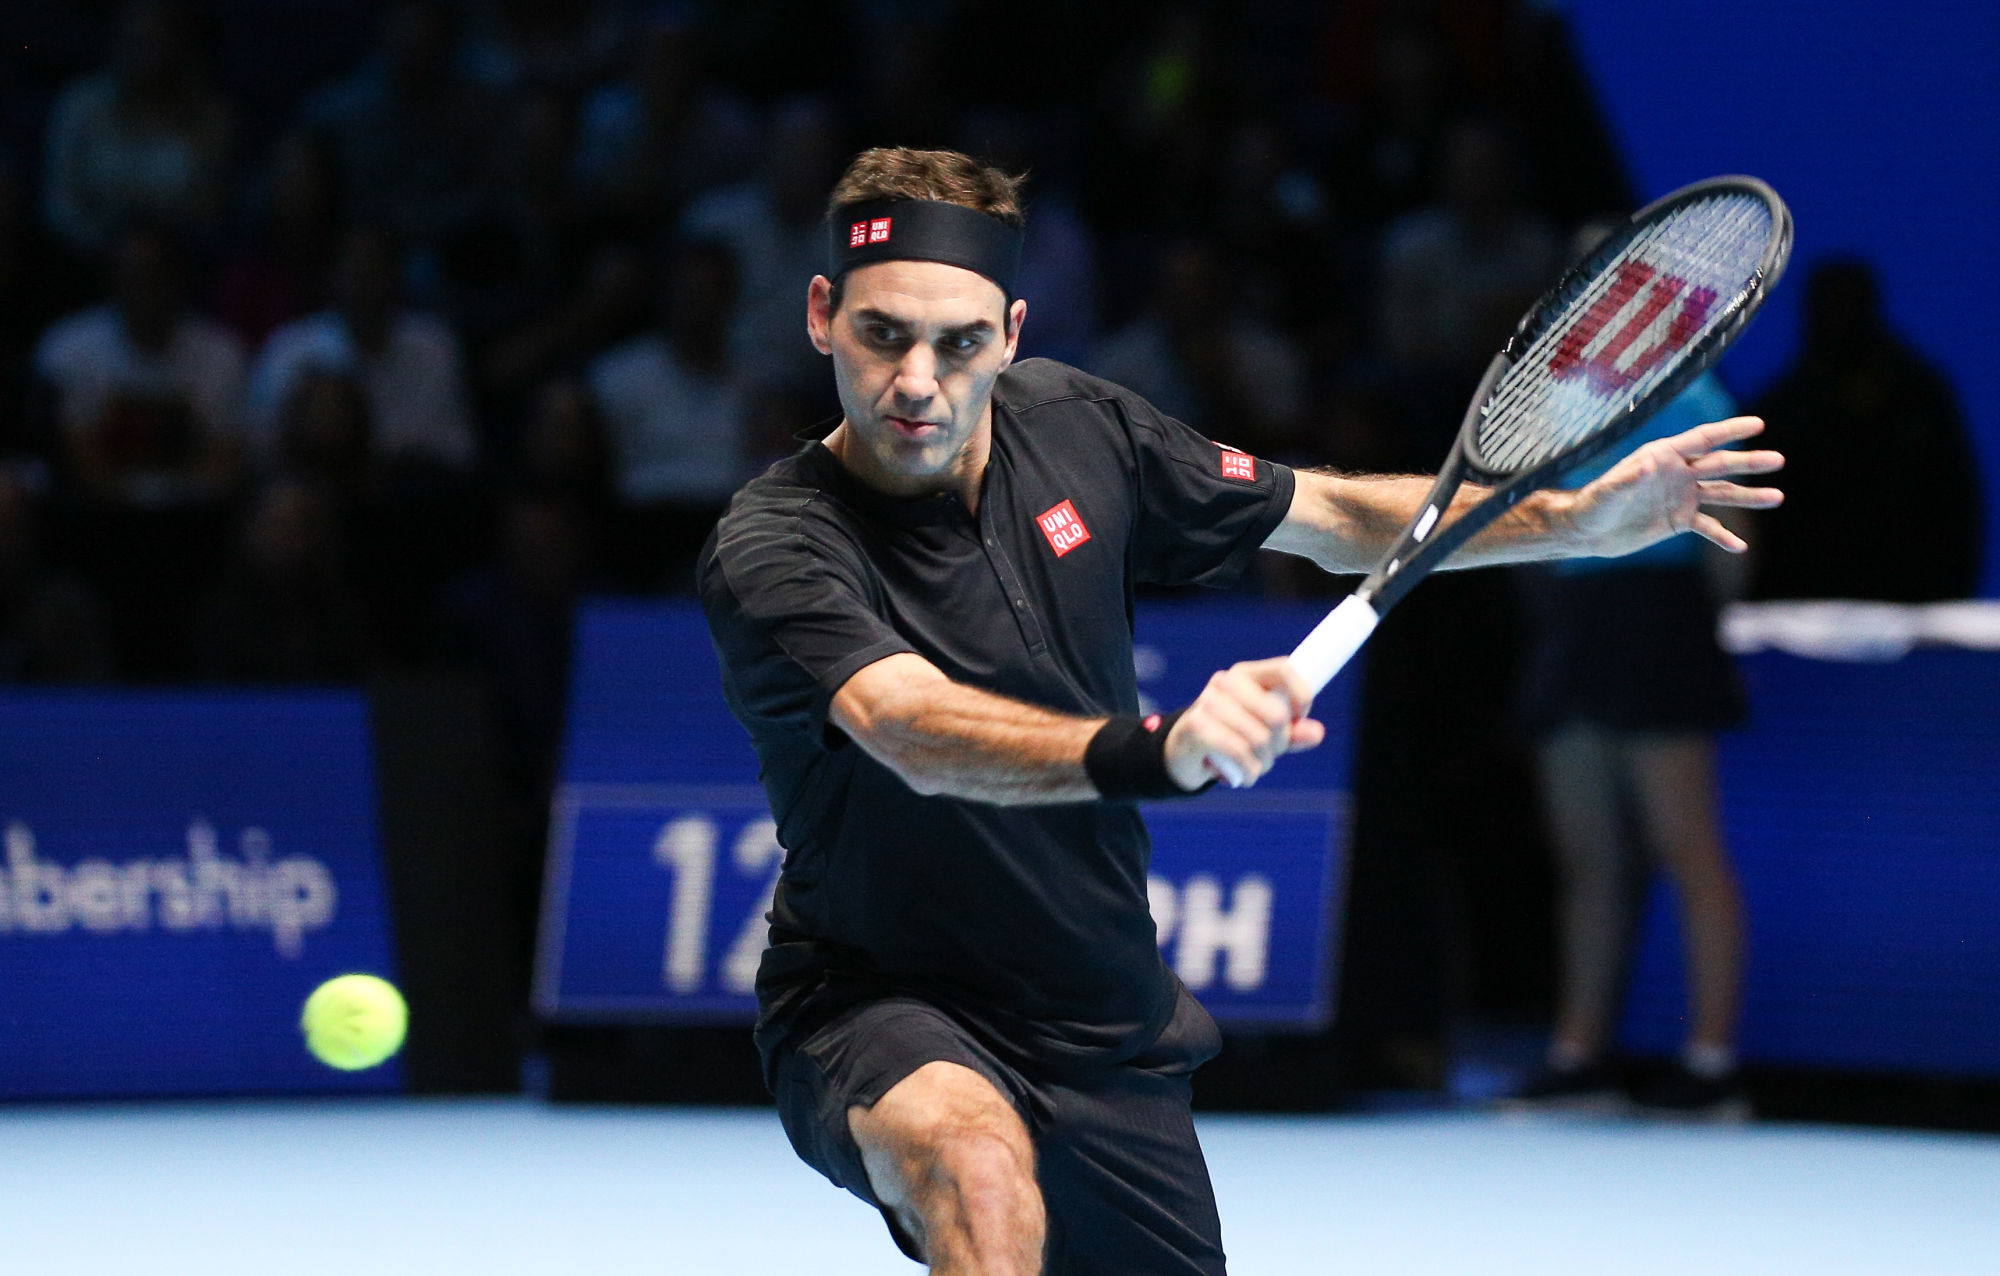 14th November 2019; O2 Arena, London, England; Nitto ATP Tennis Finals; Roger Federer (SUI) plays a backhand shot in his match against Novak Djokovic (SRB) - Editorial Use 

Photo by Icon Sport - Roger FEDERER - O2 Arena - Londres (Angleterre)